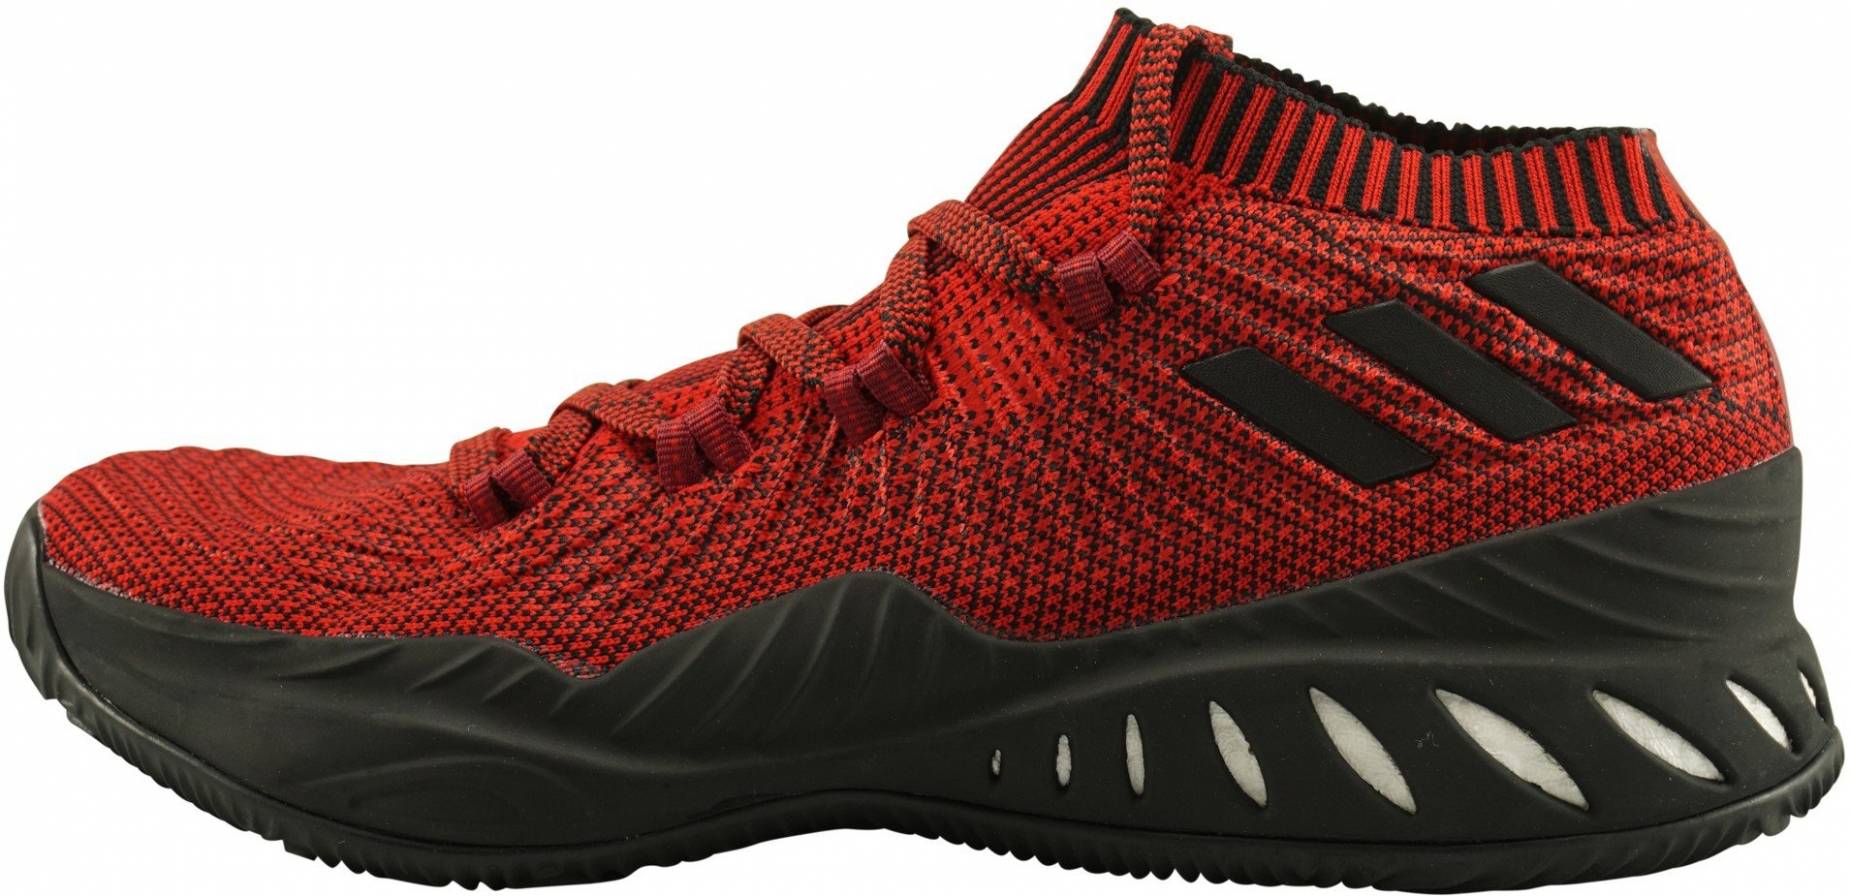 Partina City Expense Zoo at night 7 Reasons to/NOT to Buy Adidas Crazy Explosive 2017 Primeknit Low (Oct  2022) | RunRepeat